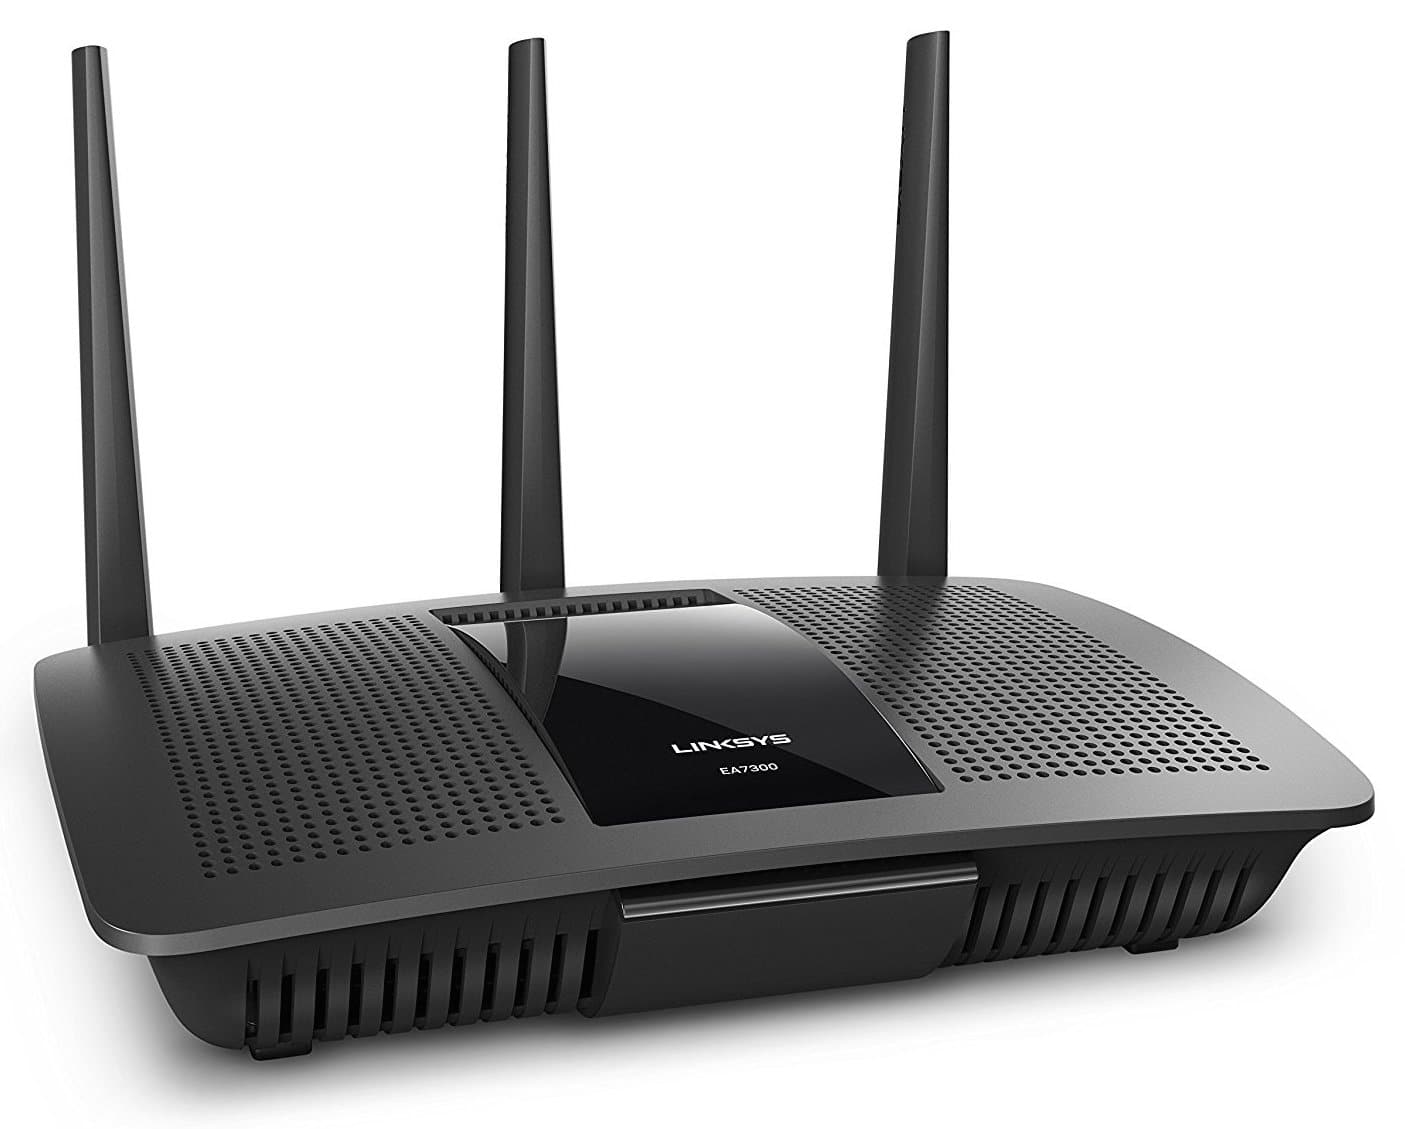 10 Best Wireless Router Reviews 2018 – Smart Routers for Gaming